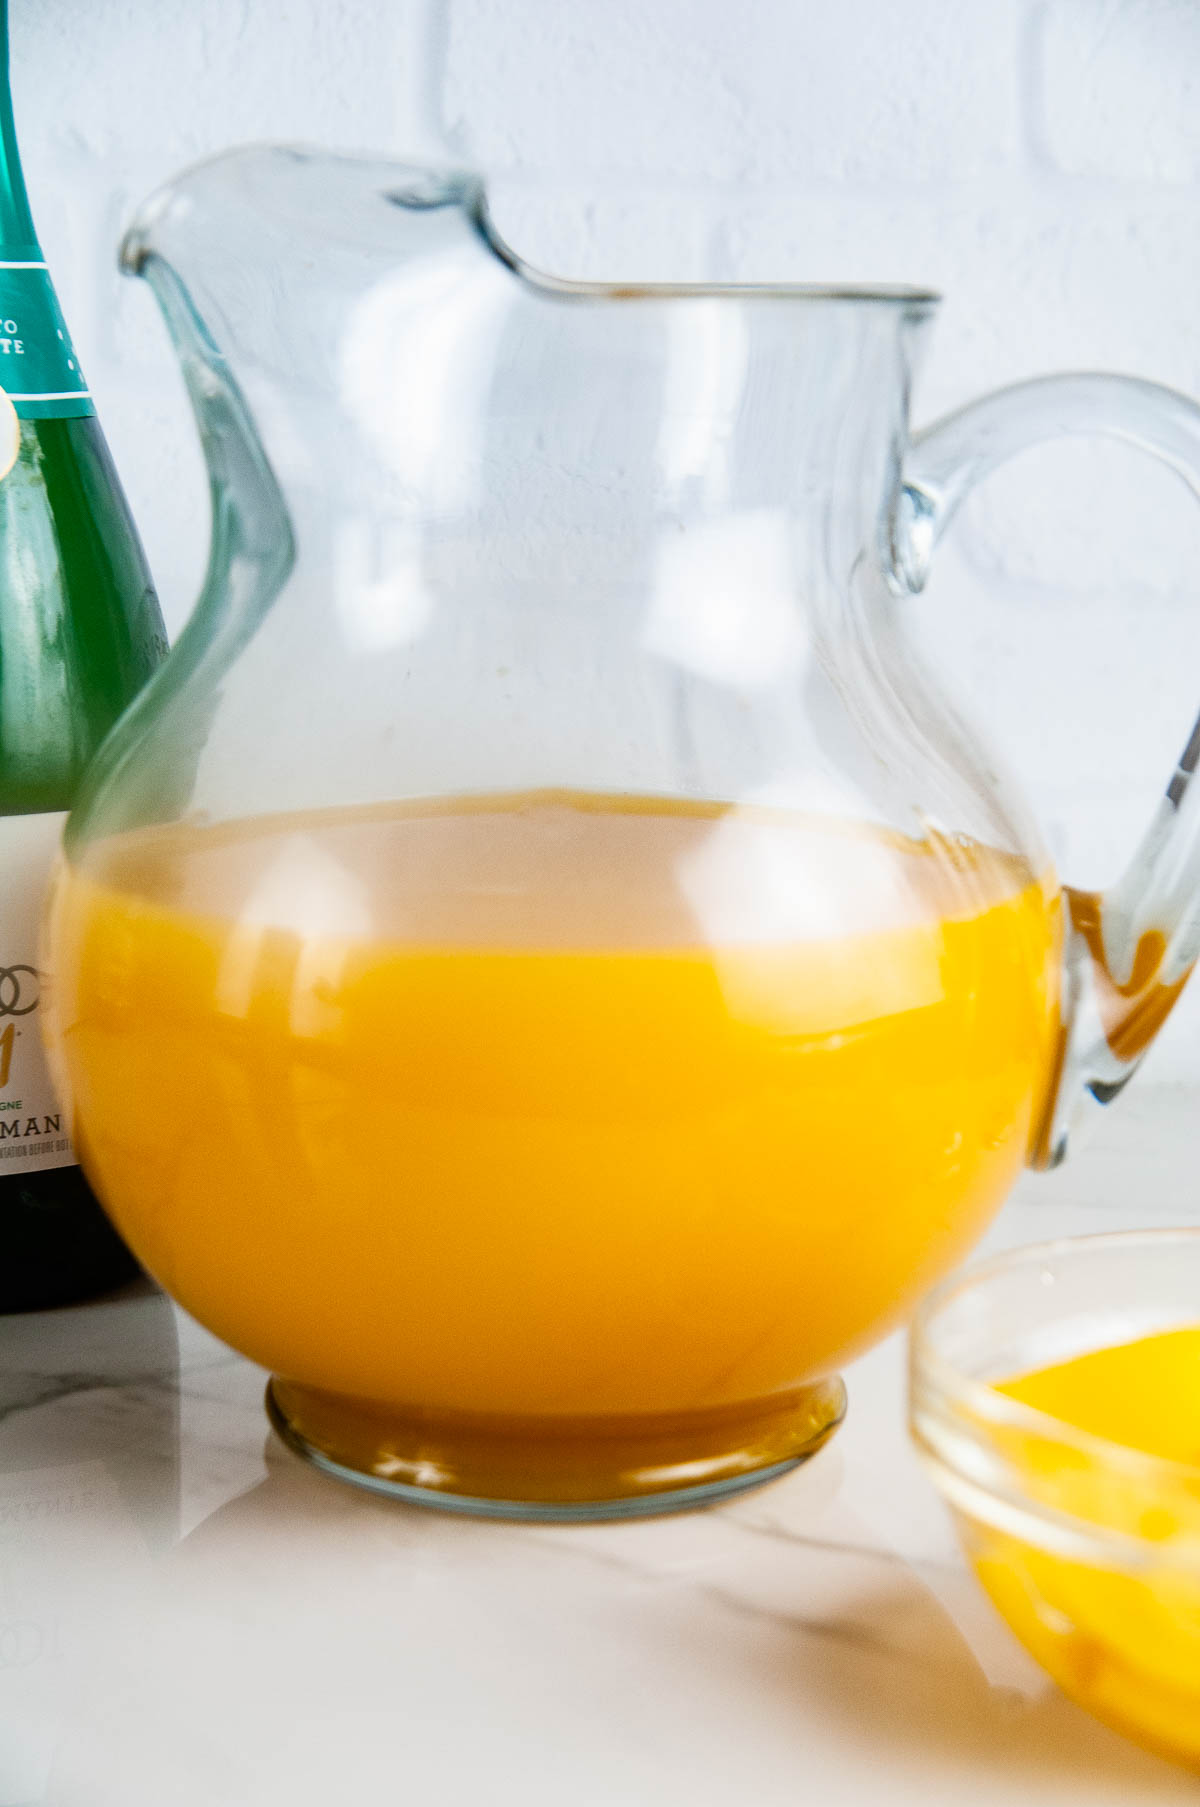 Mix the orange juice and peach nectar together in a pitcher.Mix the orange juice and peach nectar together in a pitcher.